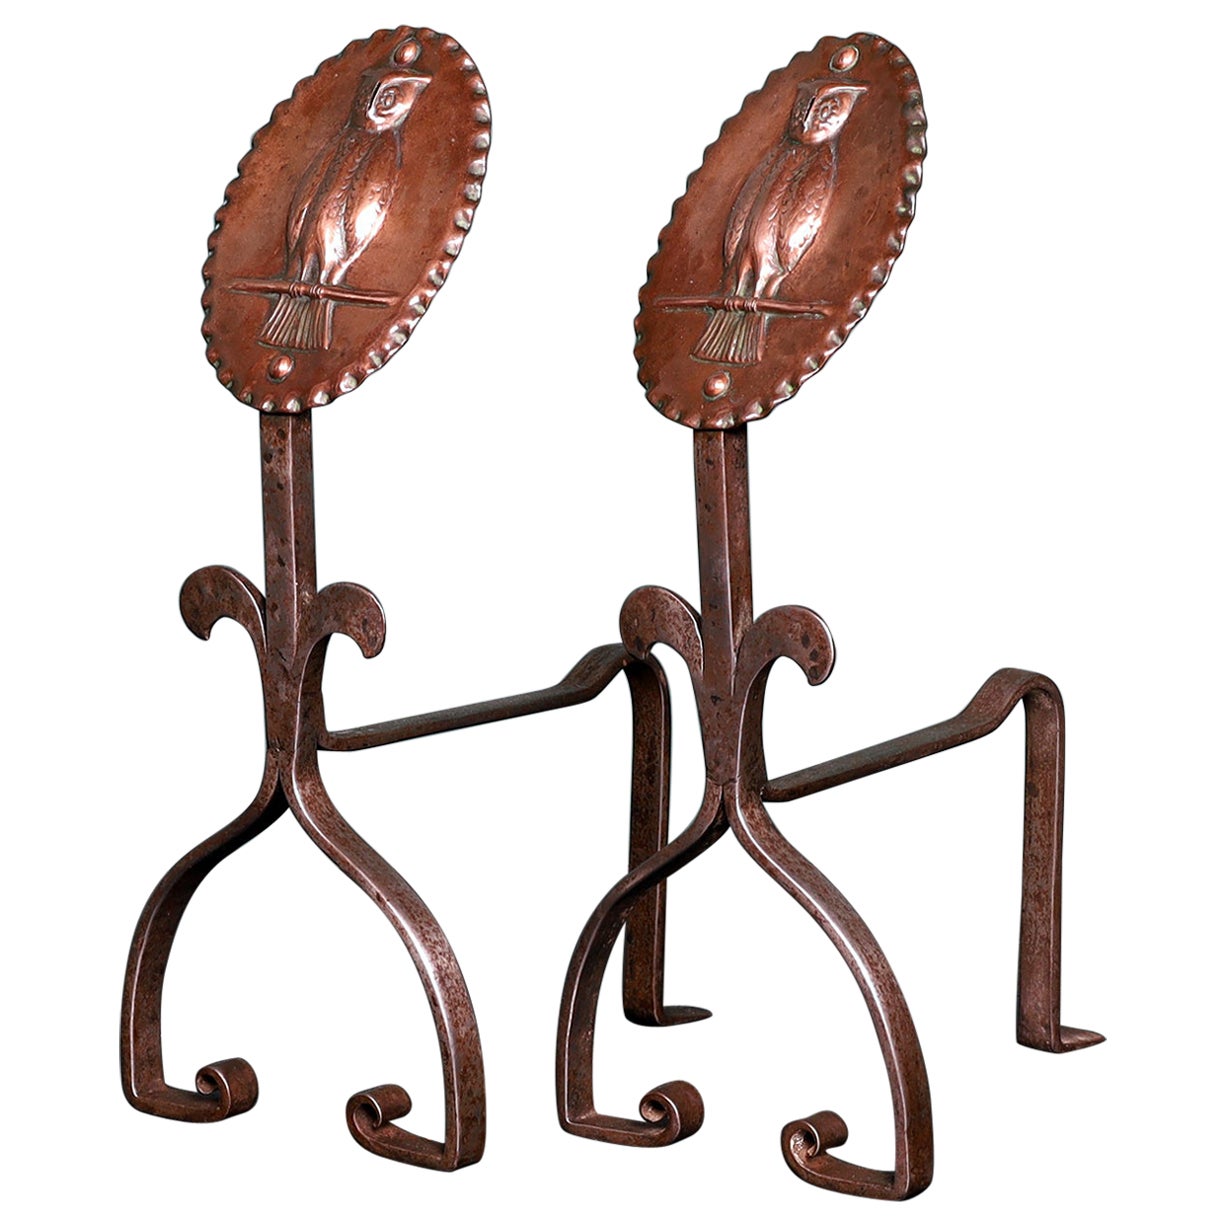 A Pair of Bronze & Wrought Owl Fire Andirons Rests